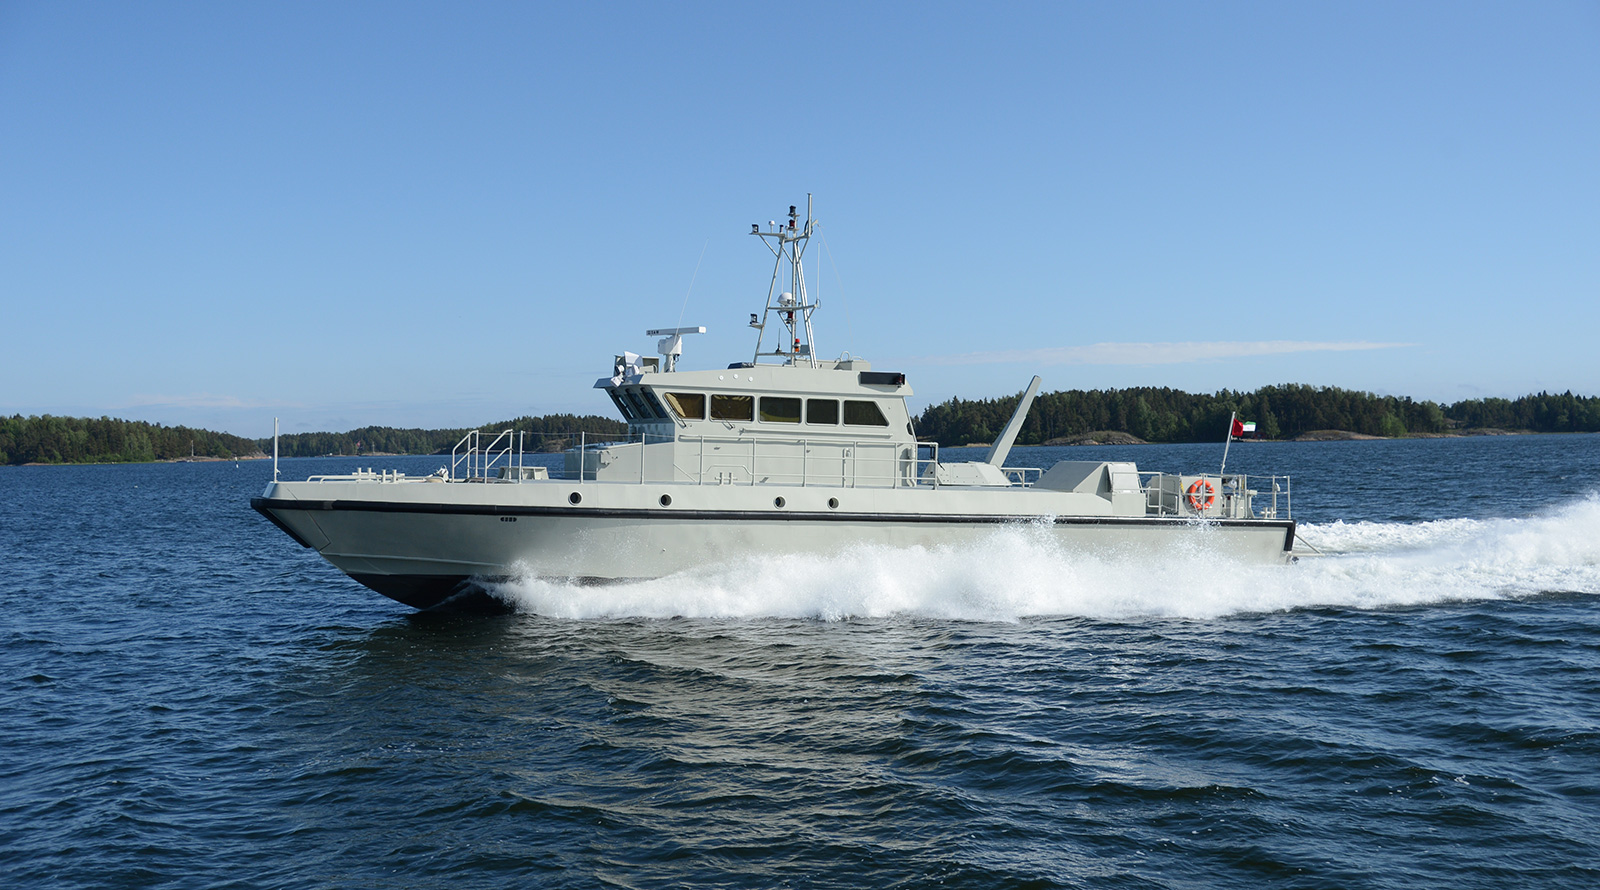 Swede Ship Awarded Awarded Swedish Navy Contract to Build 8 Fast Mortar Vessels